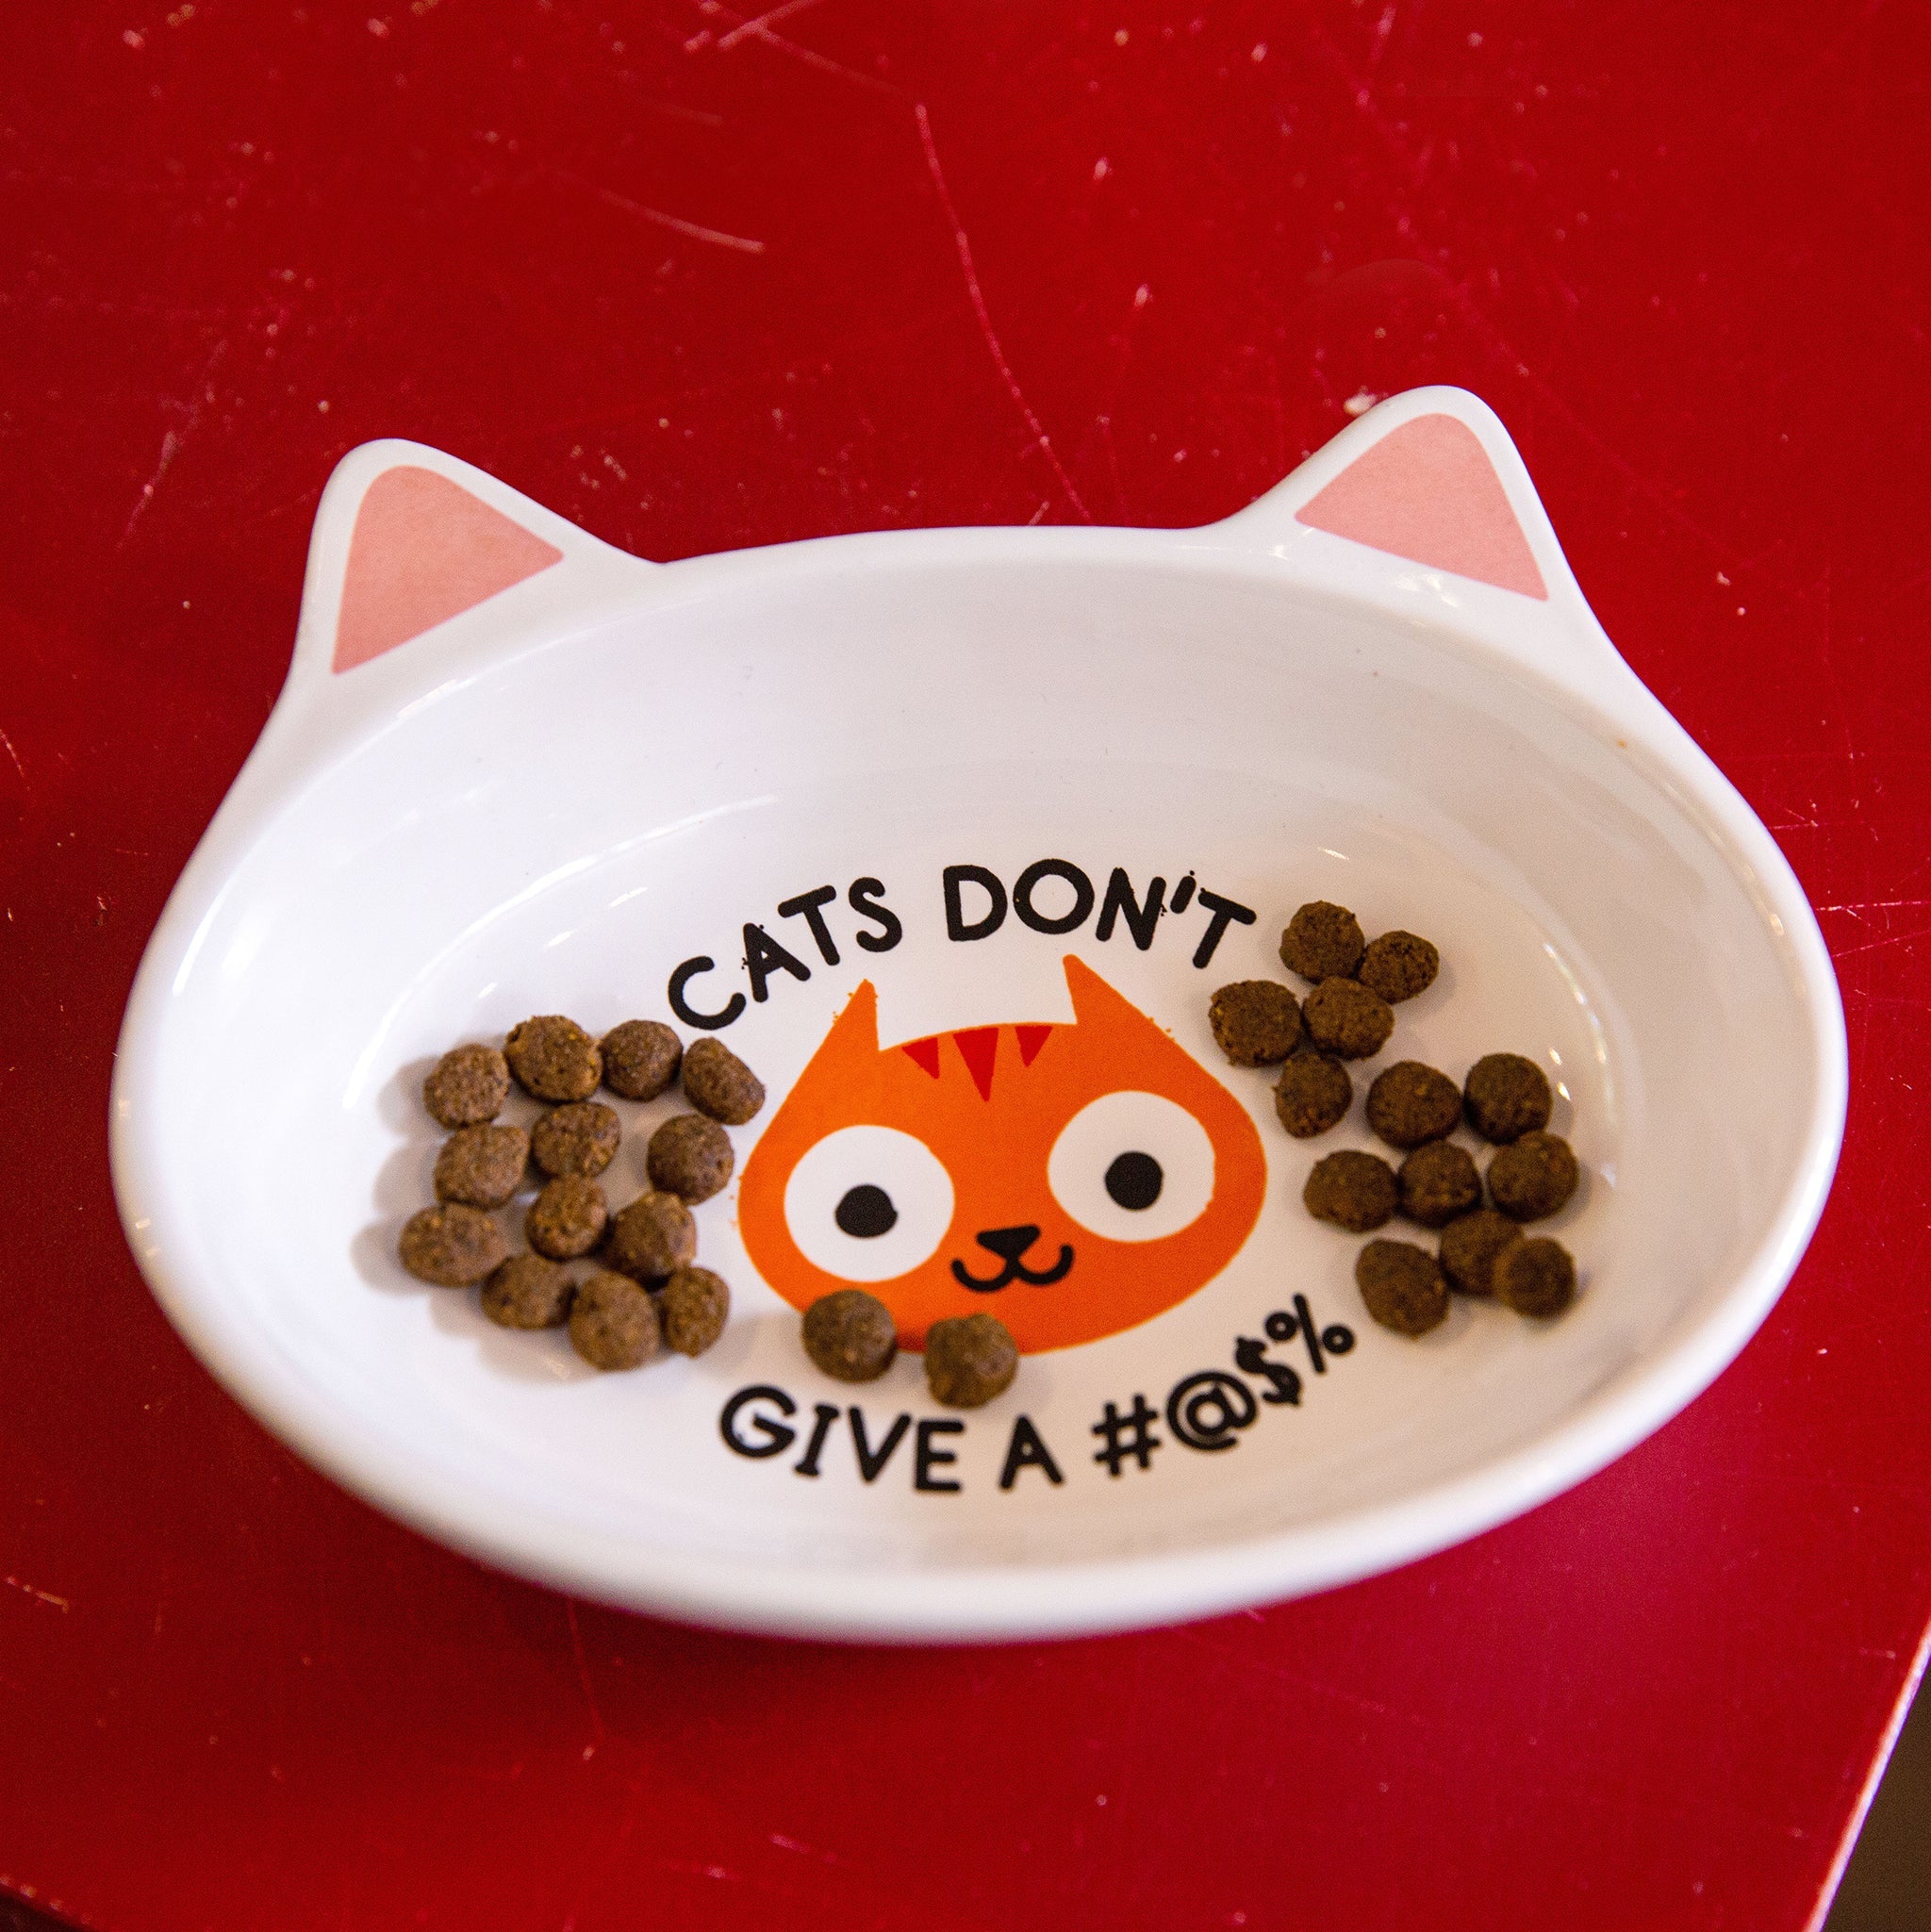 Cats Dont Give A #*@!! Ceramic Cat Dish